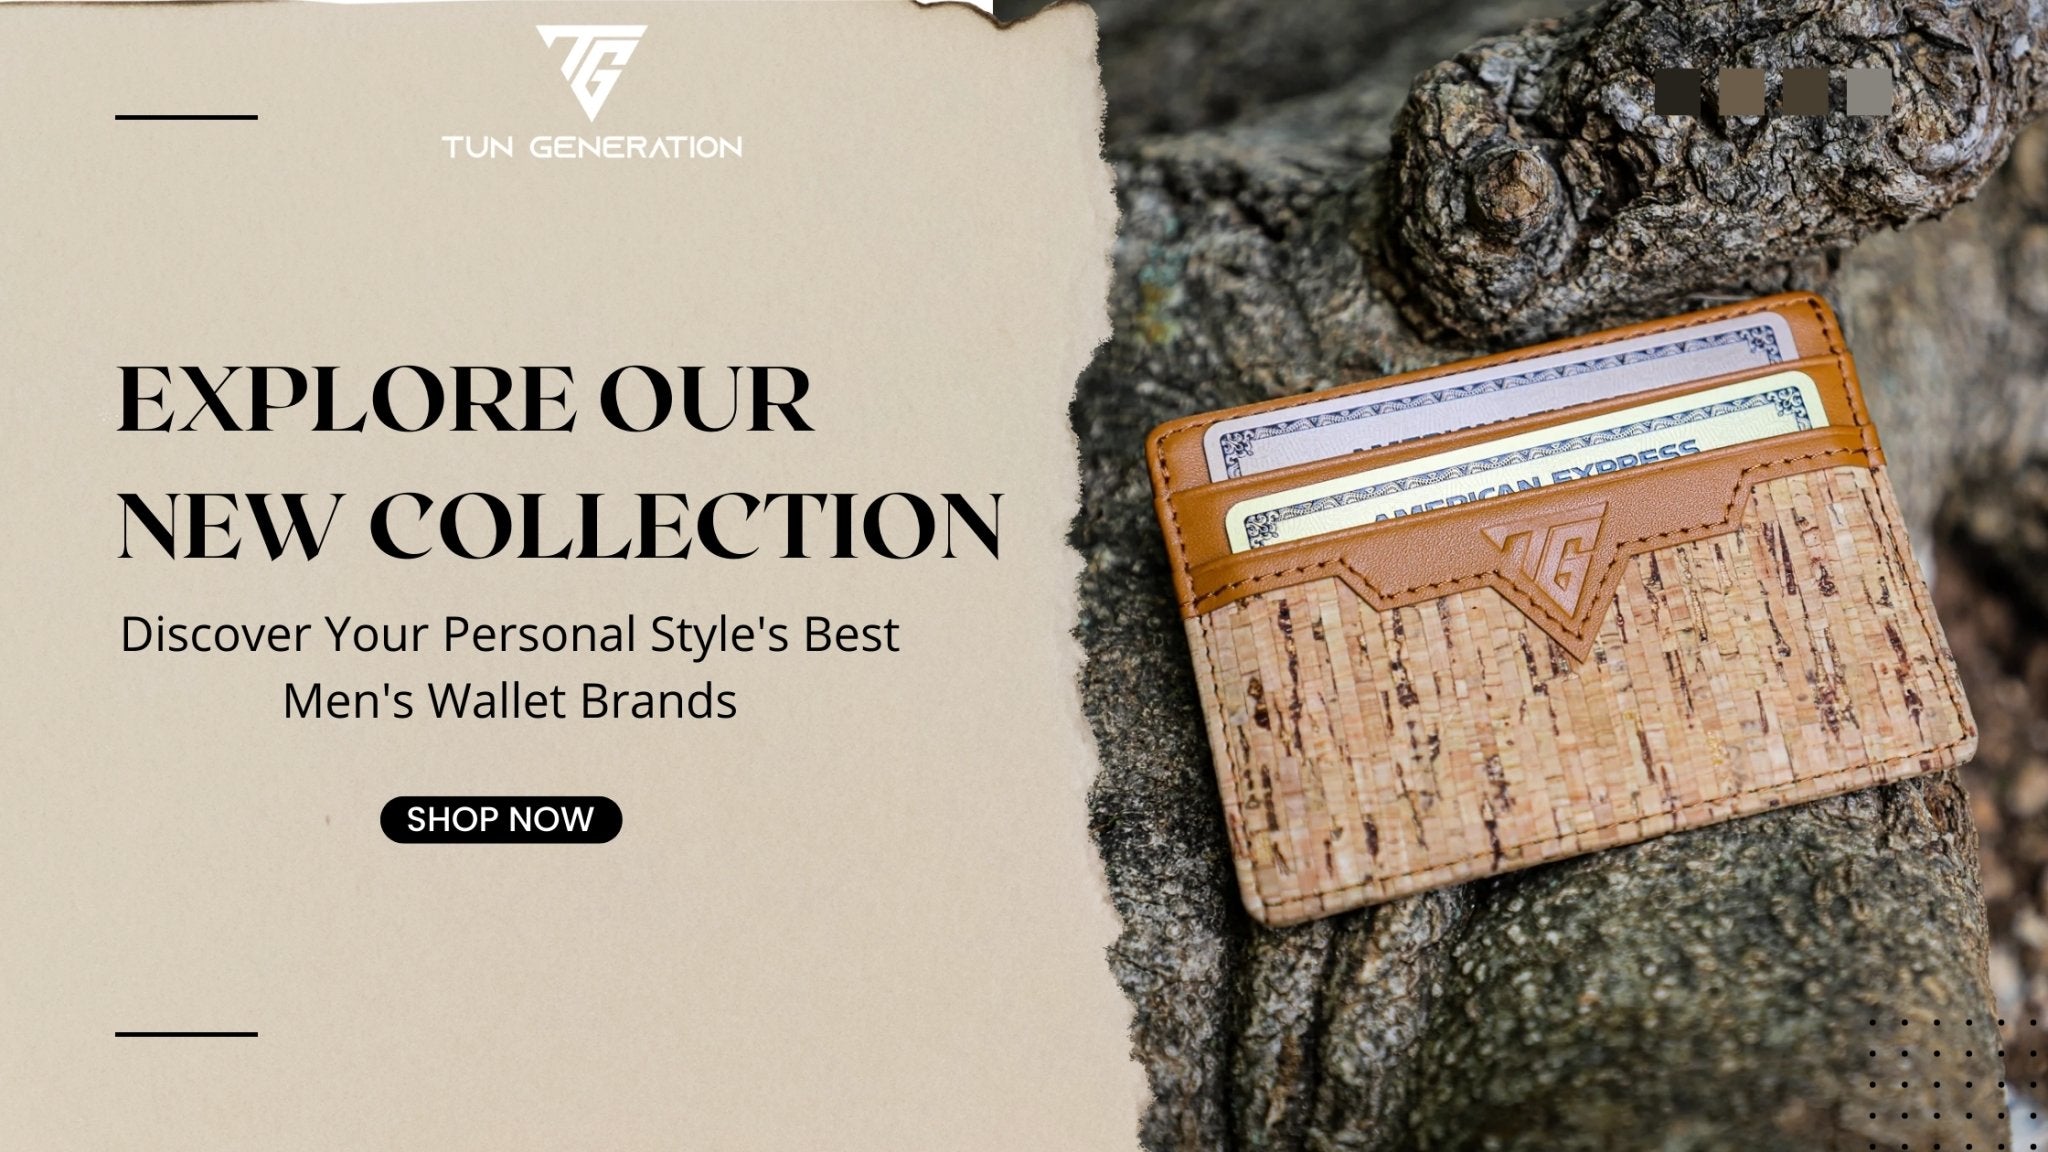 Discover Your Personal Style's Best Men's Wallet Brands - Tun Generation